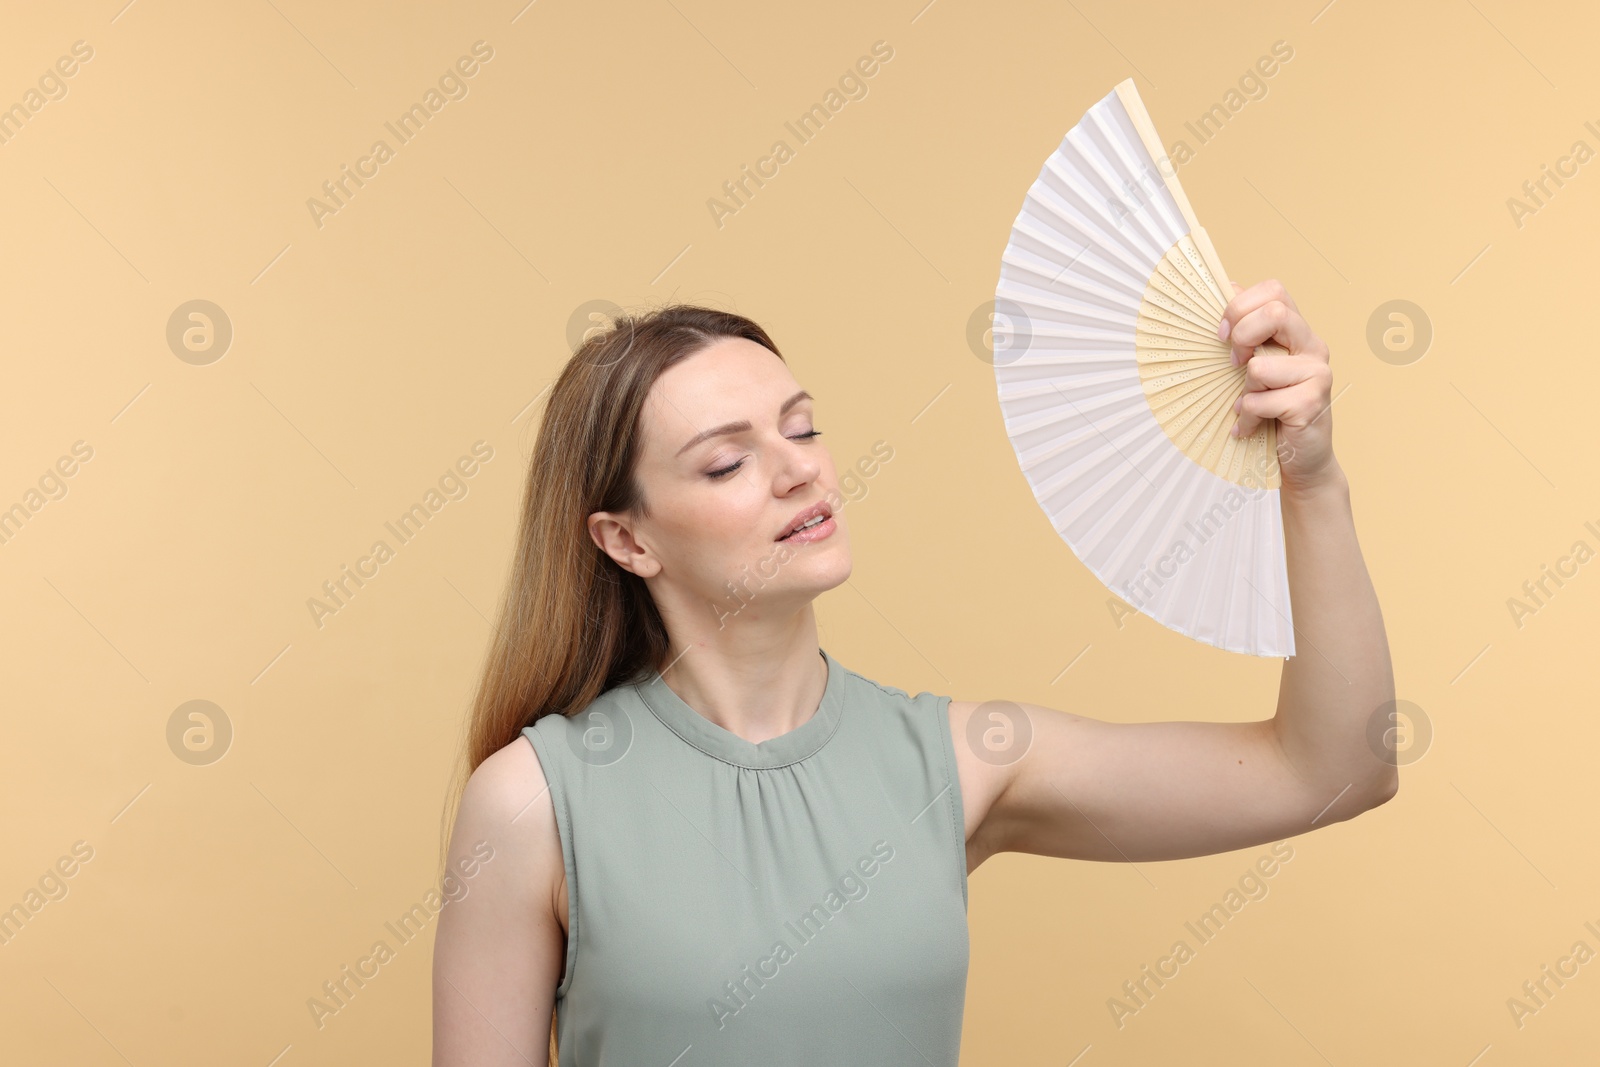 Photo of Beautiful woman waving hand fan to cool herself on beige background